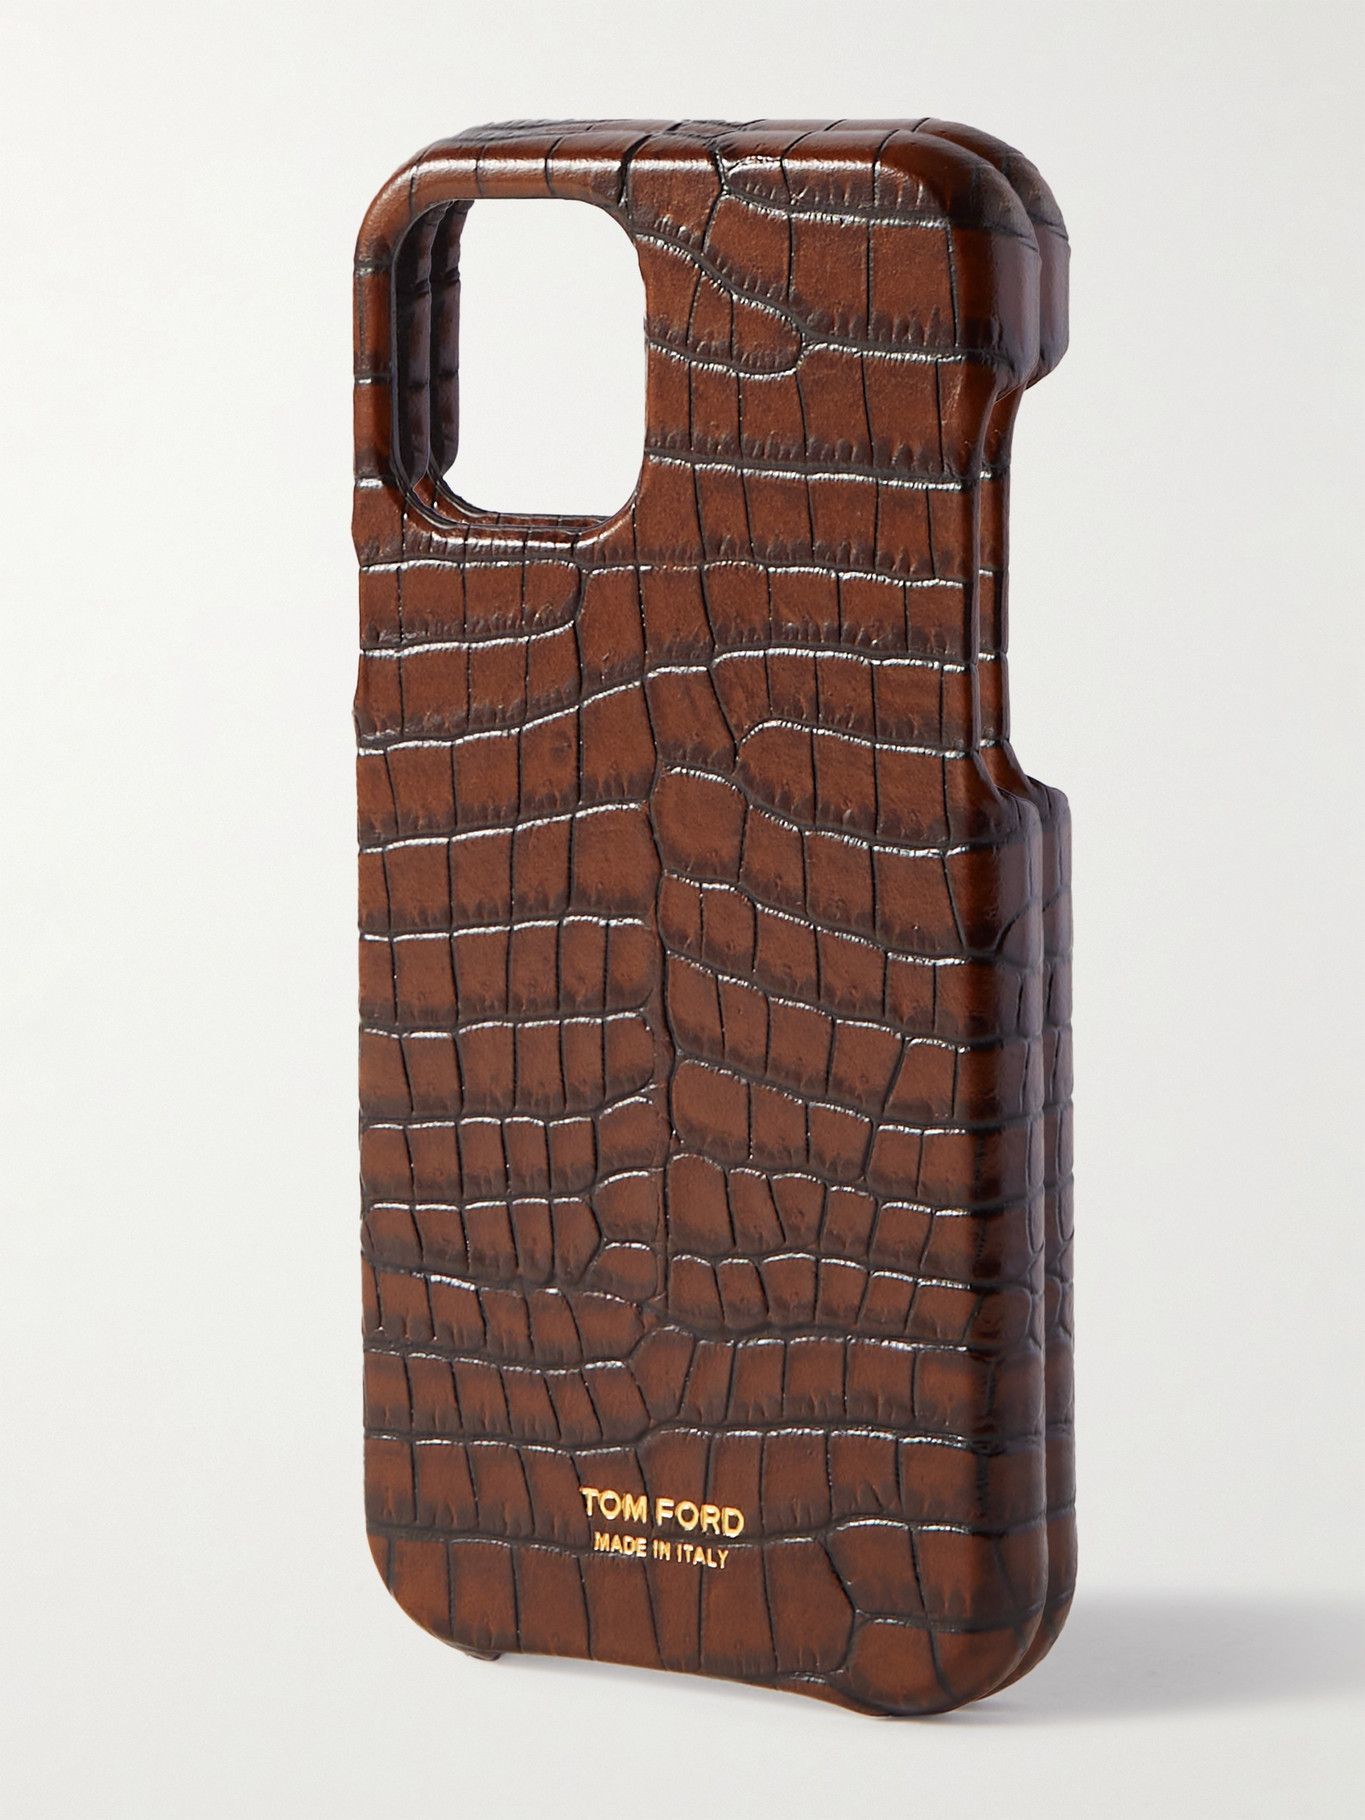 TOM FORD - Croc-Effect Leather iPhone 12 Pro Case TOM FORD